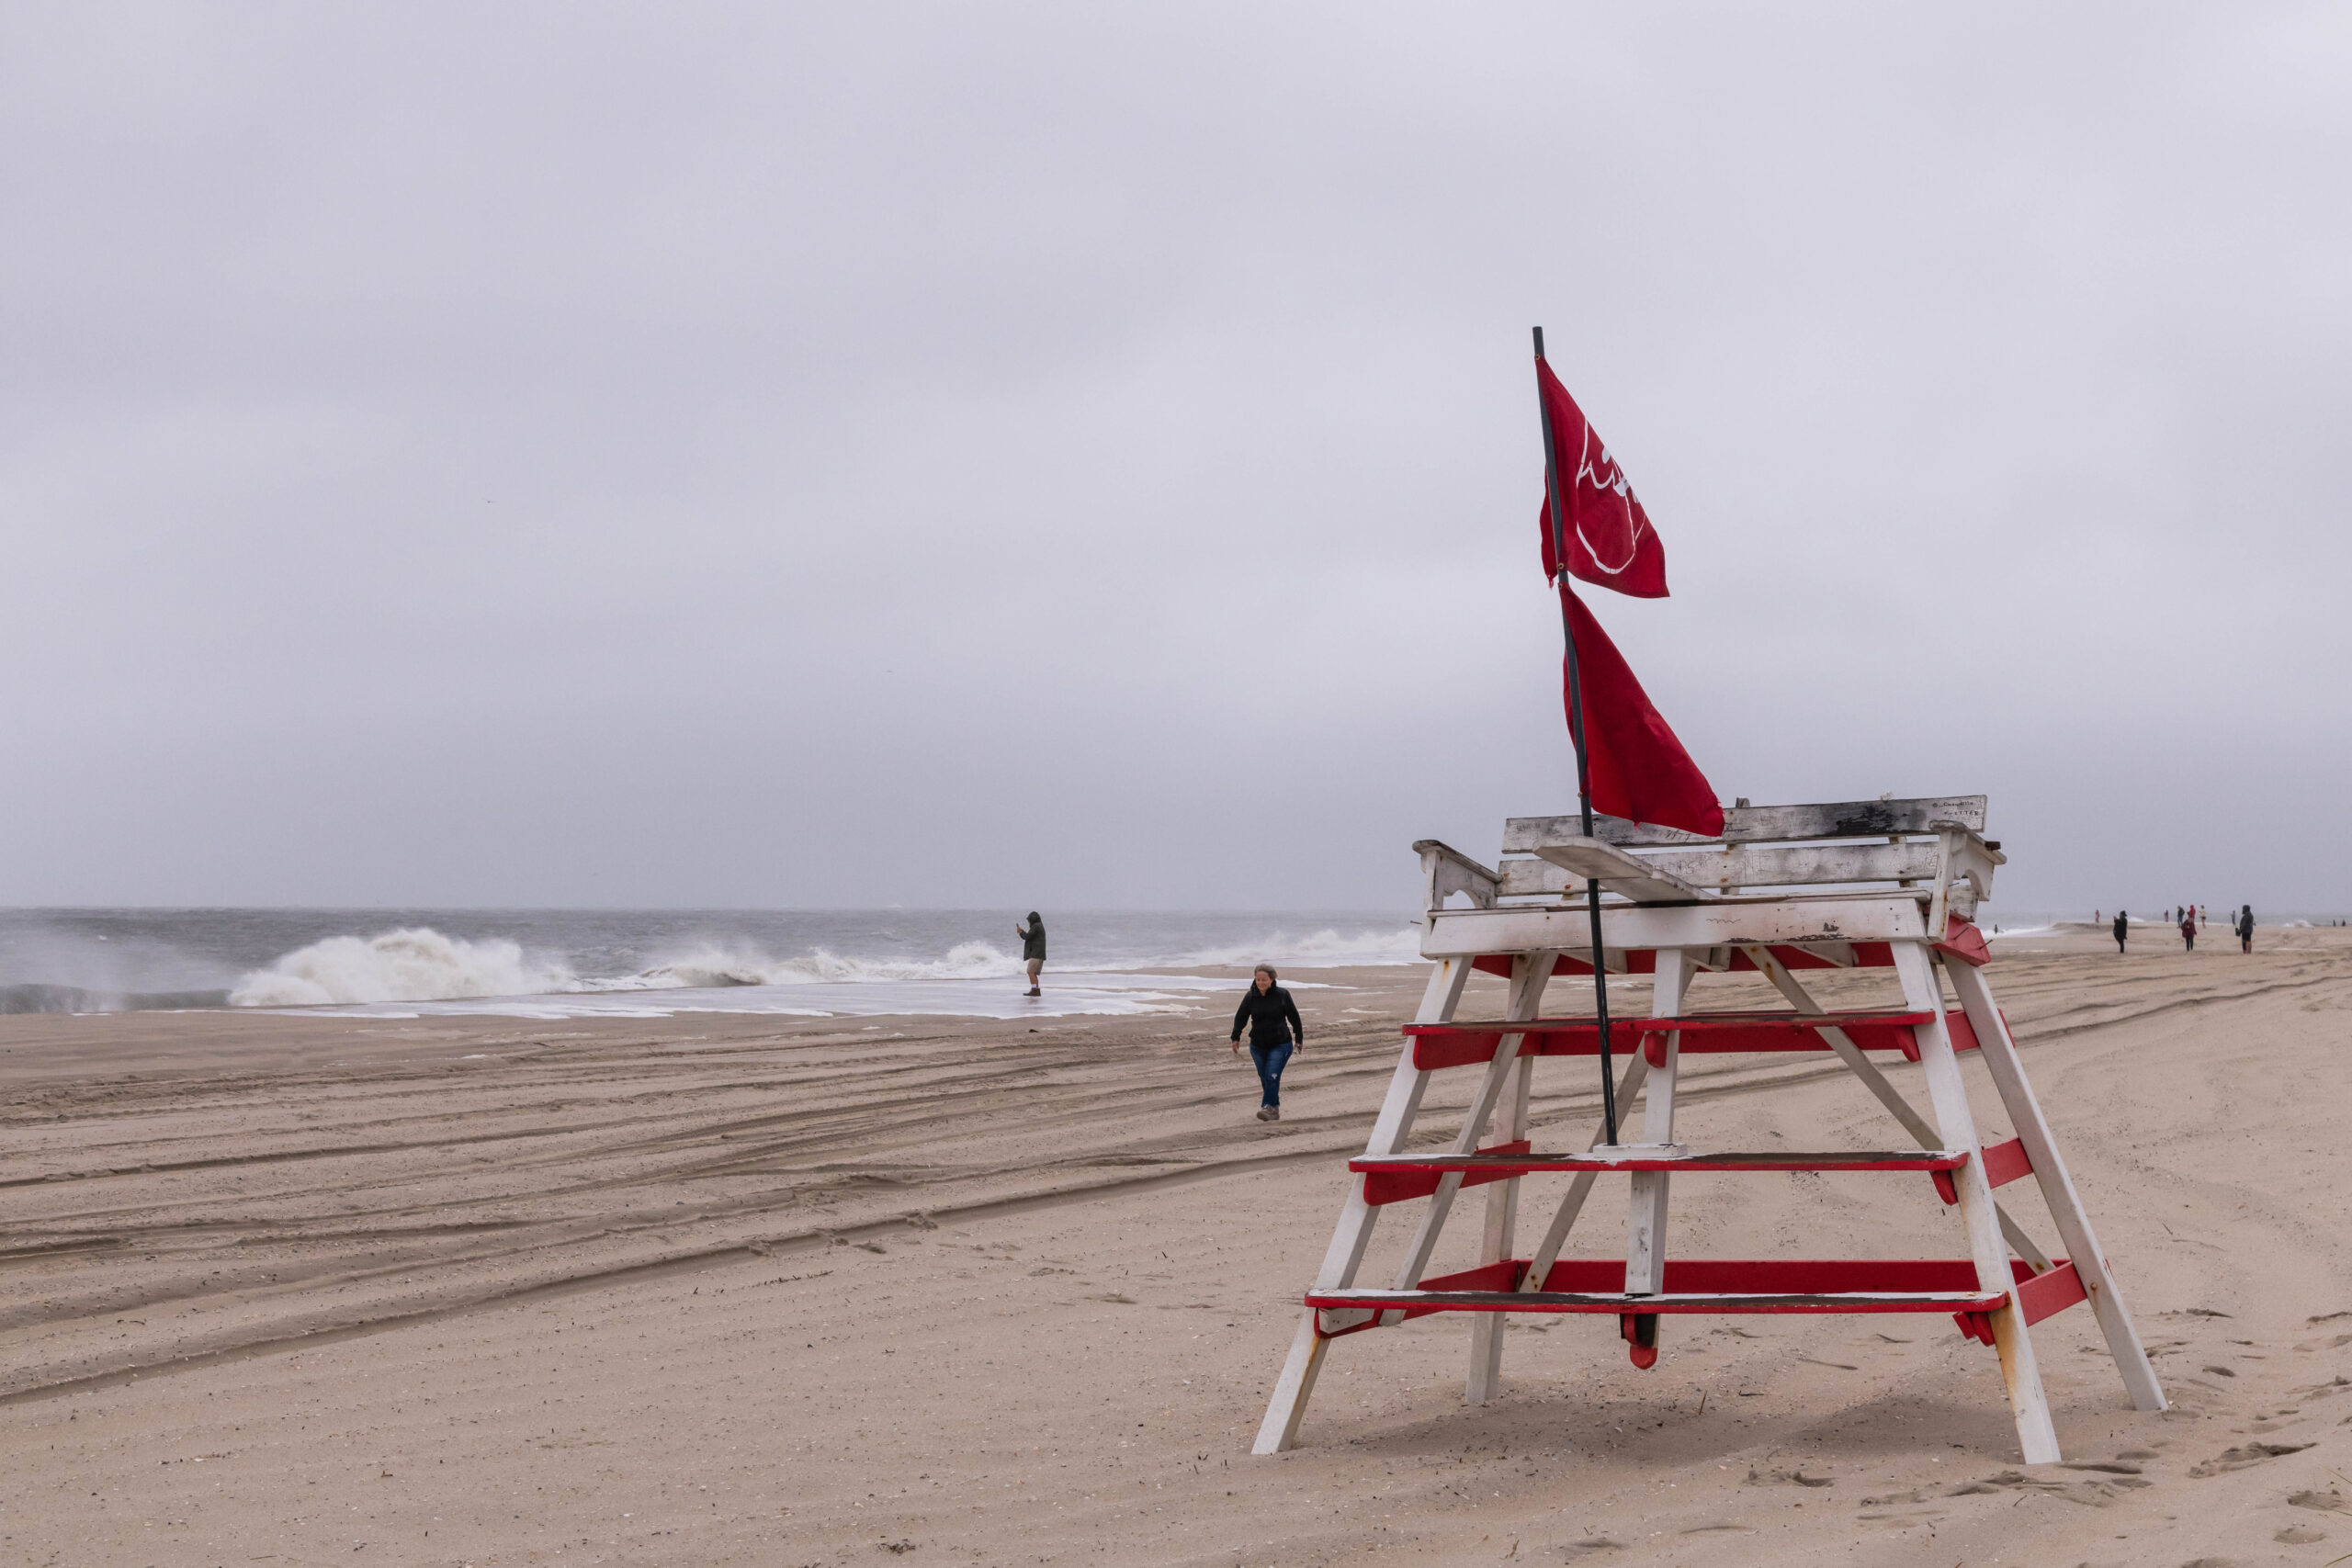 People walking on the beach with the ocean crashing and coming up high on the sand, and a Cape May lifeguard stand with two red "don't swim" flags.